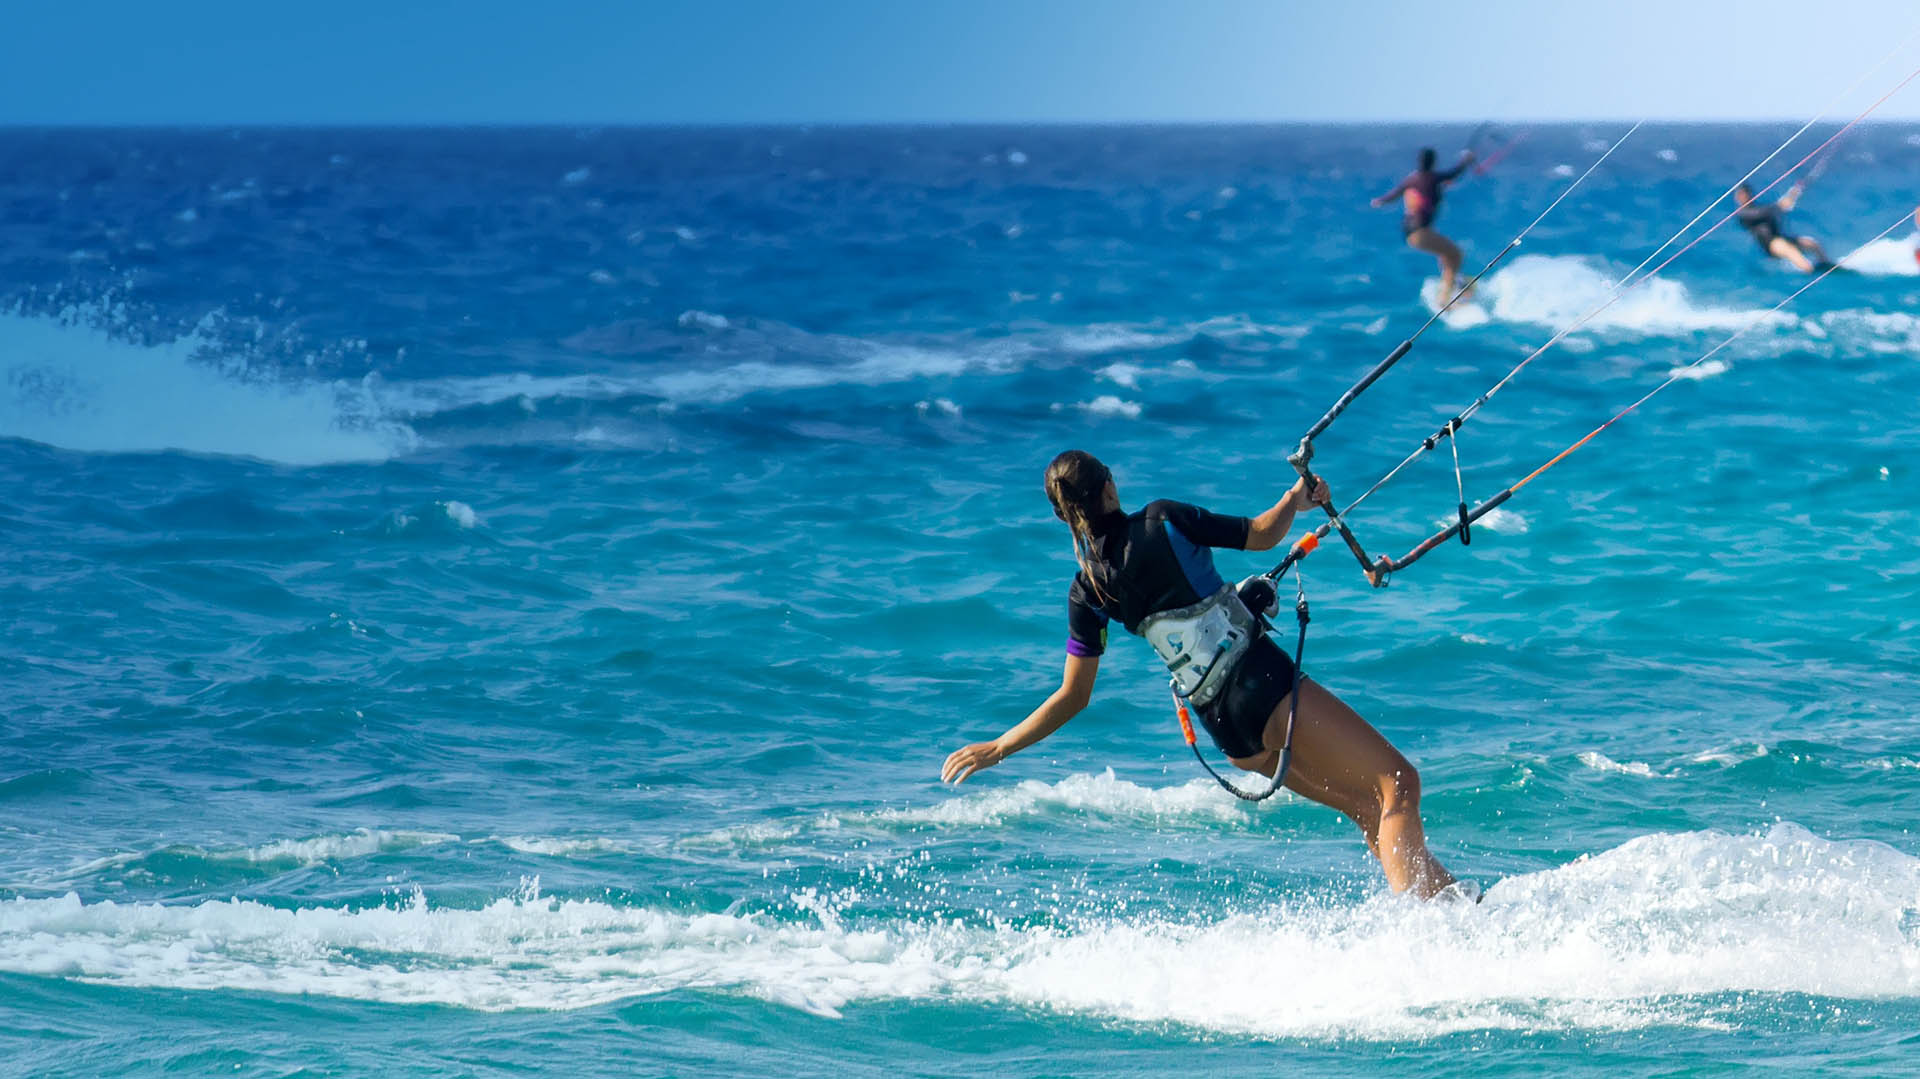   	 	  		Kitesurfing Charter 		 		 Live a unique experience 		 	   	 		 		ask for inquiry 	 	  	 			 		 		 			 		7 daysall inclusive 		 		  		 		 		 			 		max8 persons 		 		   		 		 		 			 		€ 950per day 		 		    	 	  